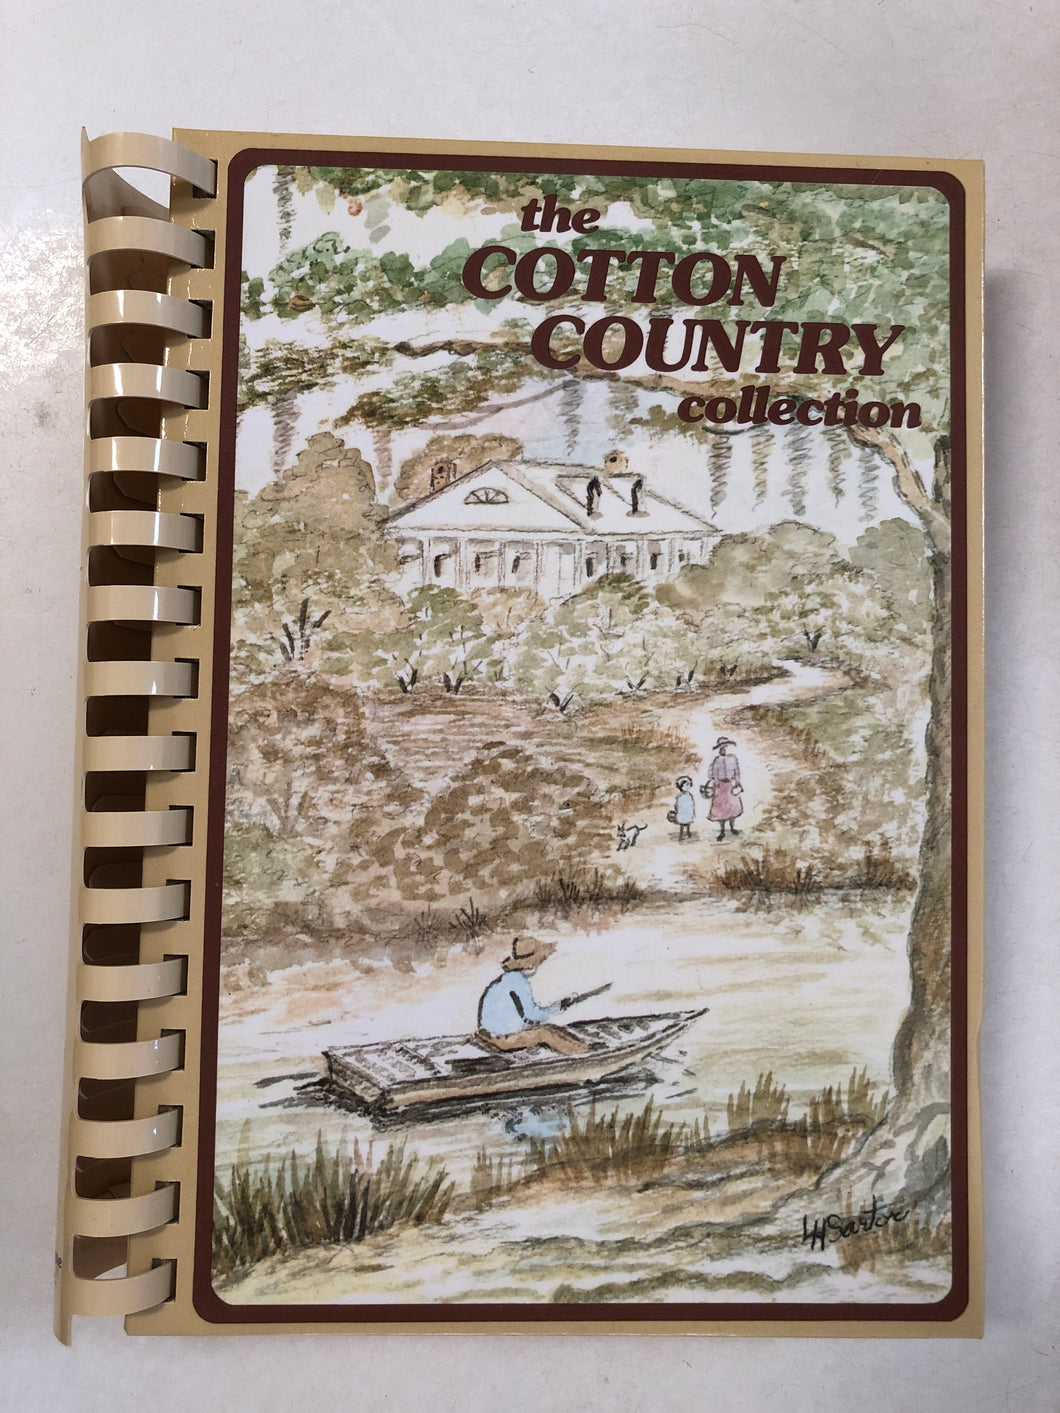 The Cotton Country Collection - Slick Cat Books 